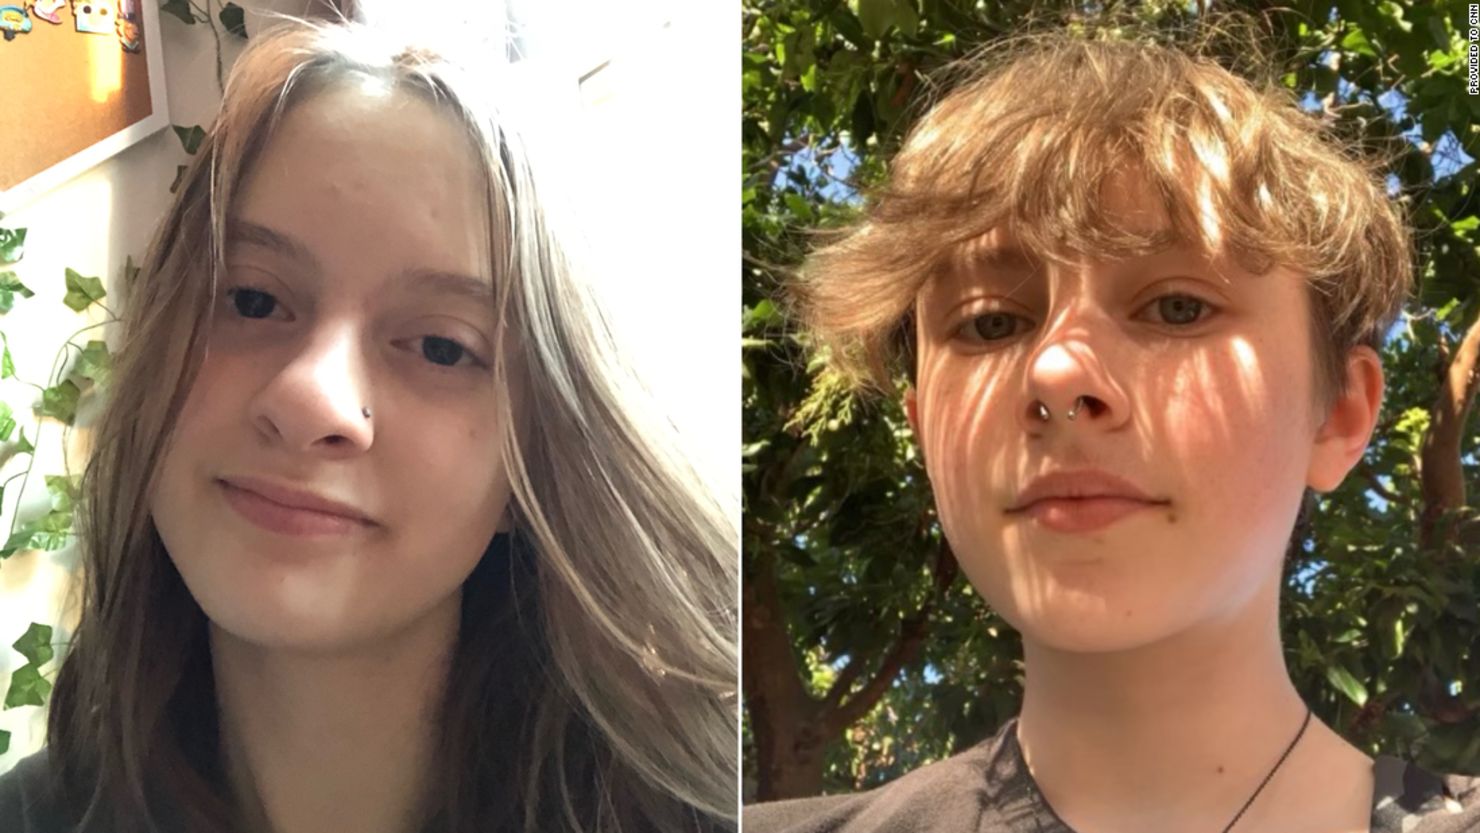 Many tweens and teens across the country are changing pronouns these days. Sylvia Chesak, left, has decided to use "any pronouns," while Amelia Blackney prefers to be referred to as they/them.